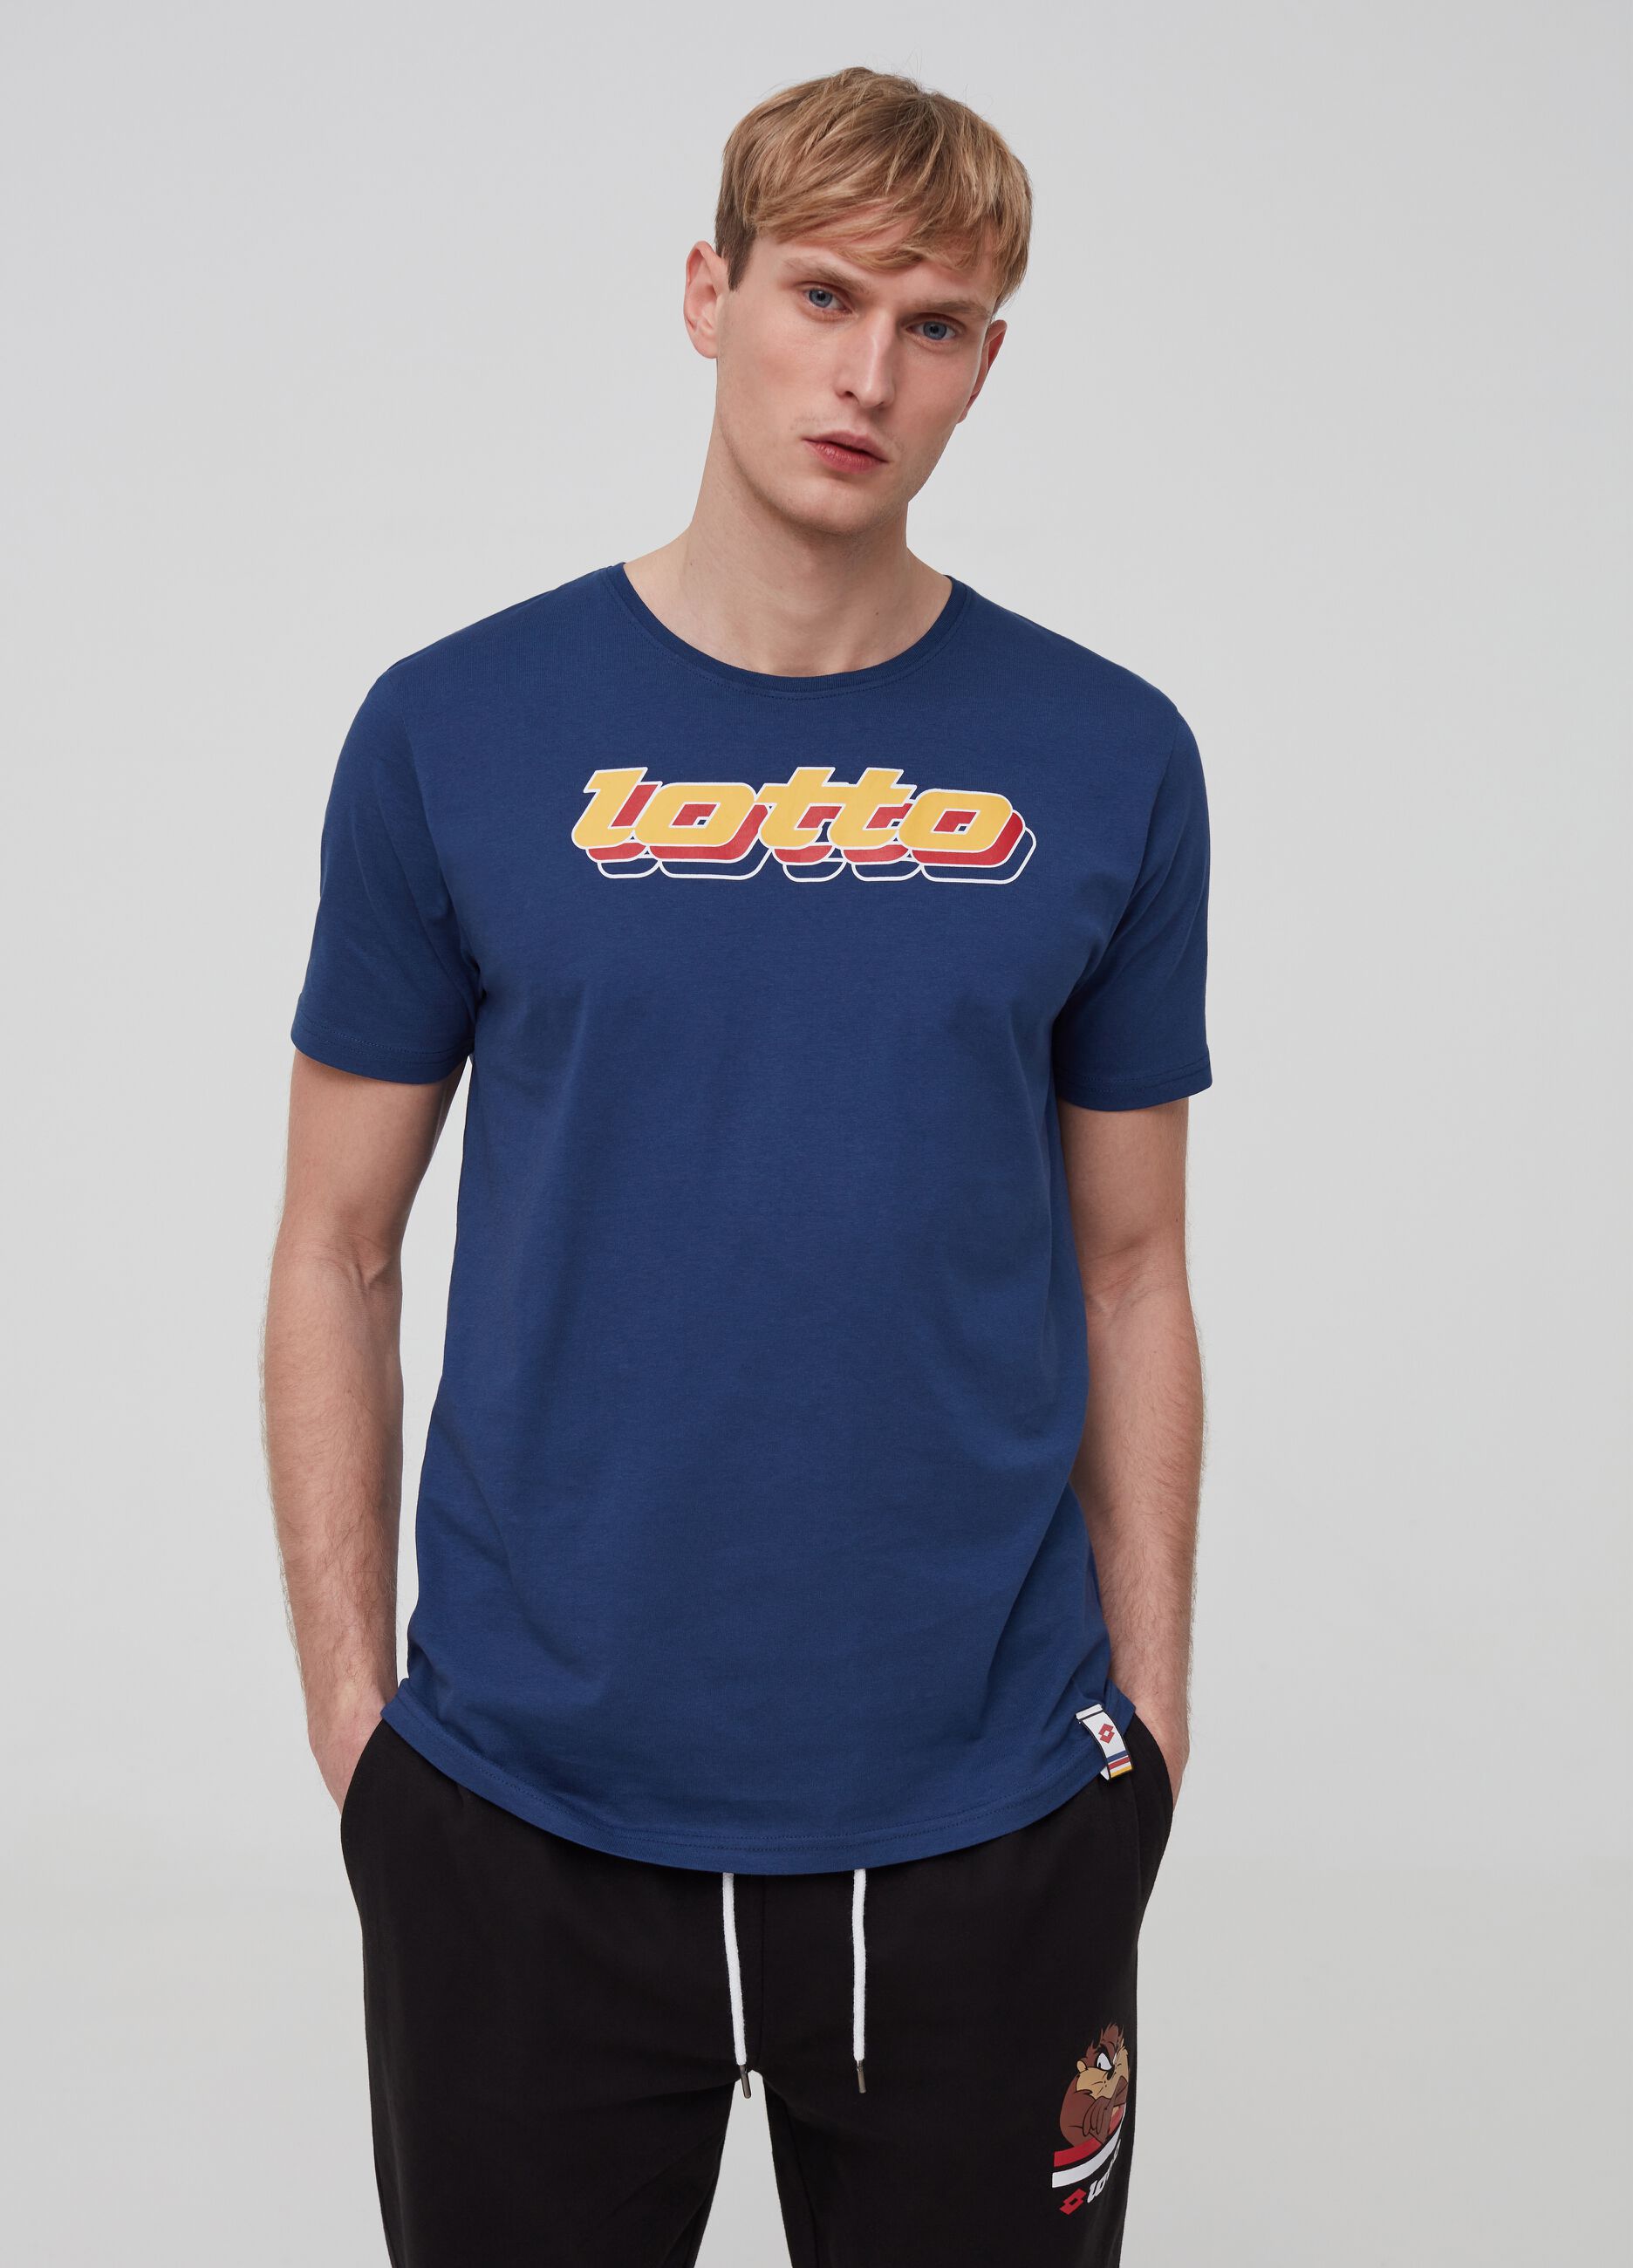 100% cotton T-shirt with Lotto print